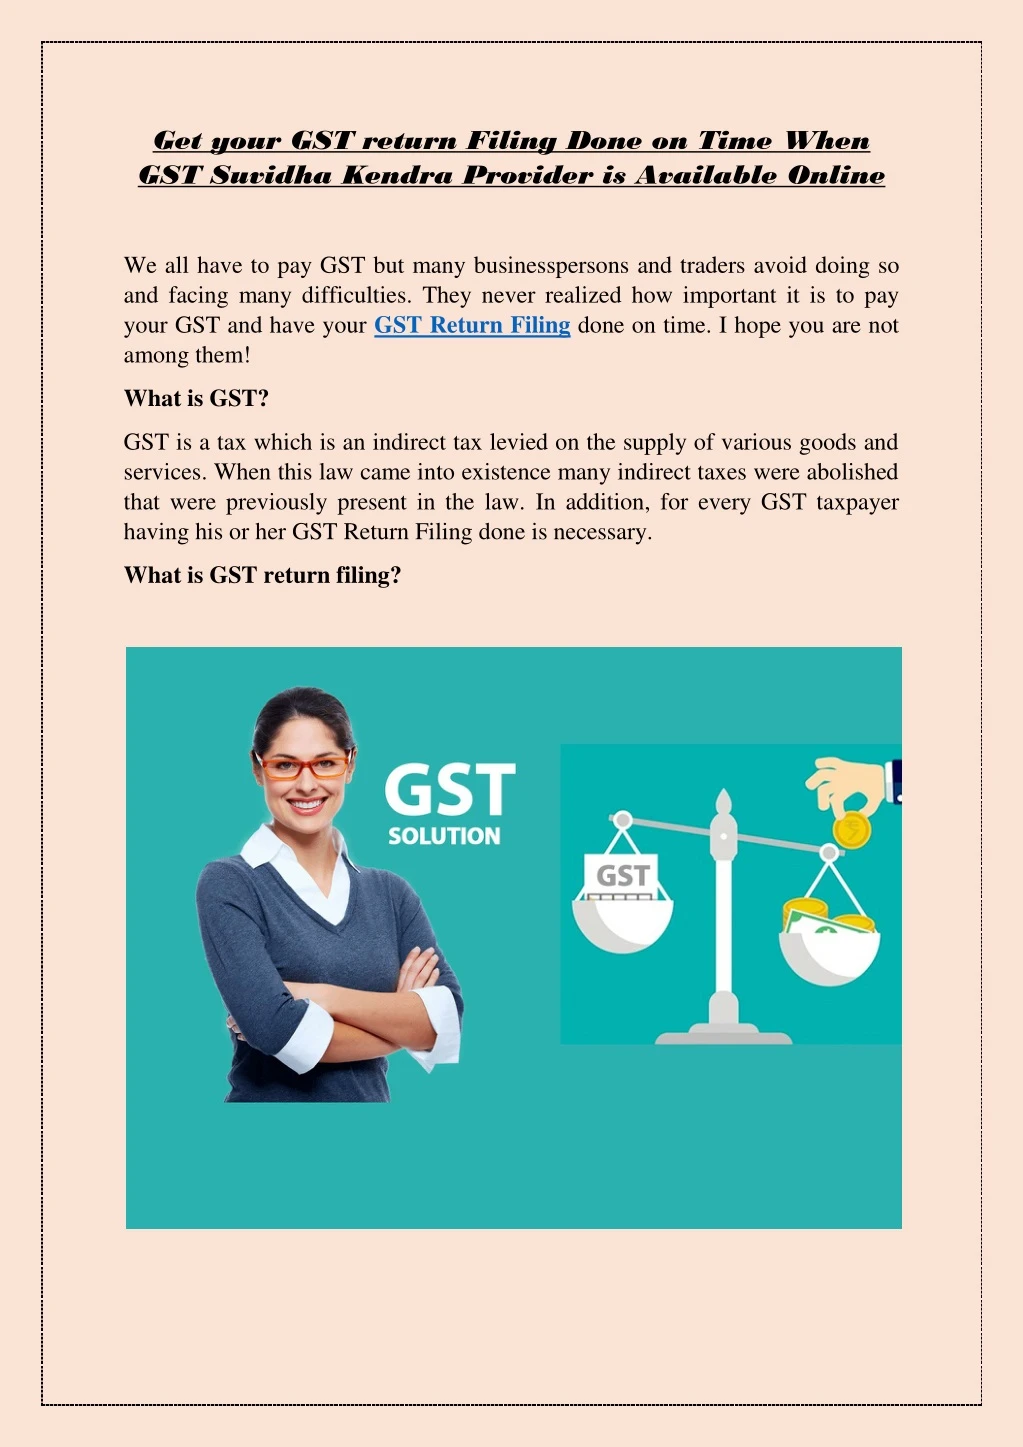 get your gst return filing done on time when